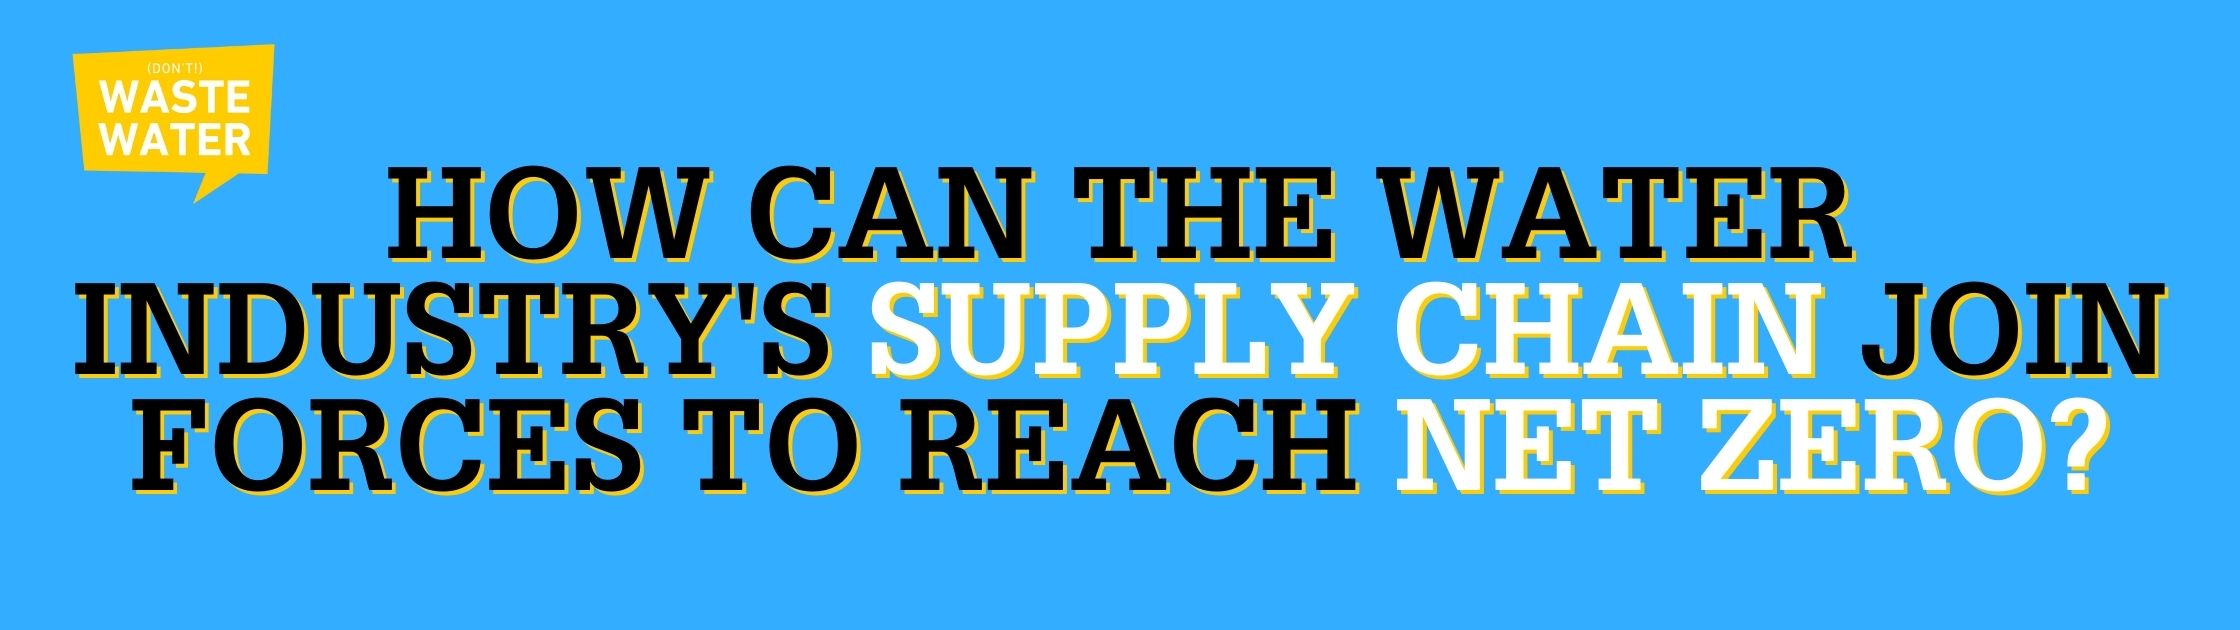 How can the Water Industry's Supply Chain join forces to reach Net Zero Water?